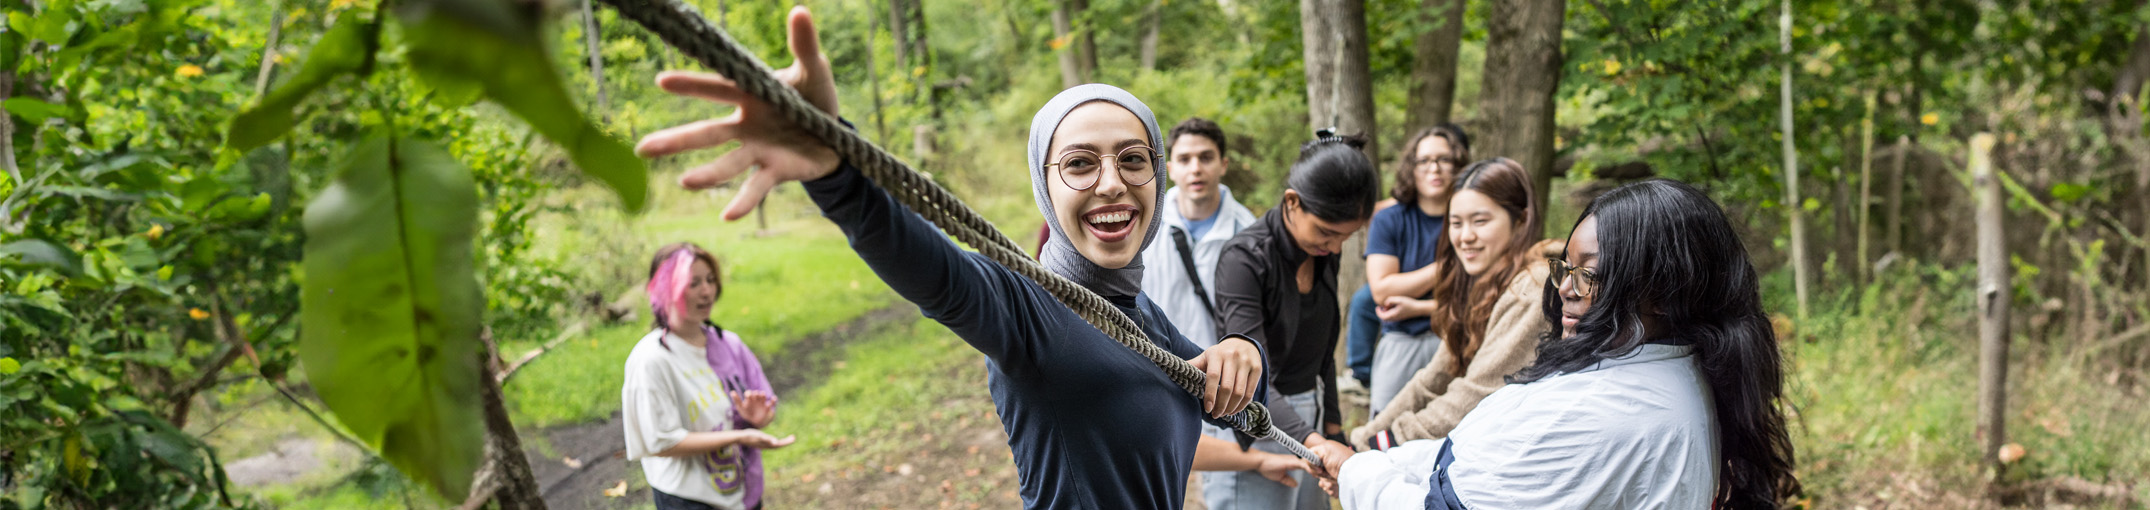 A student reaches out to grab a rope while other students hold onto the rope in the background